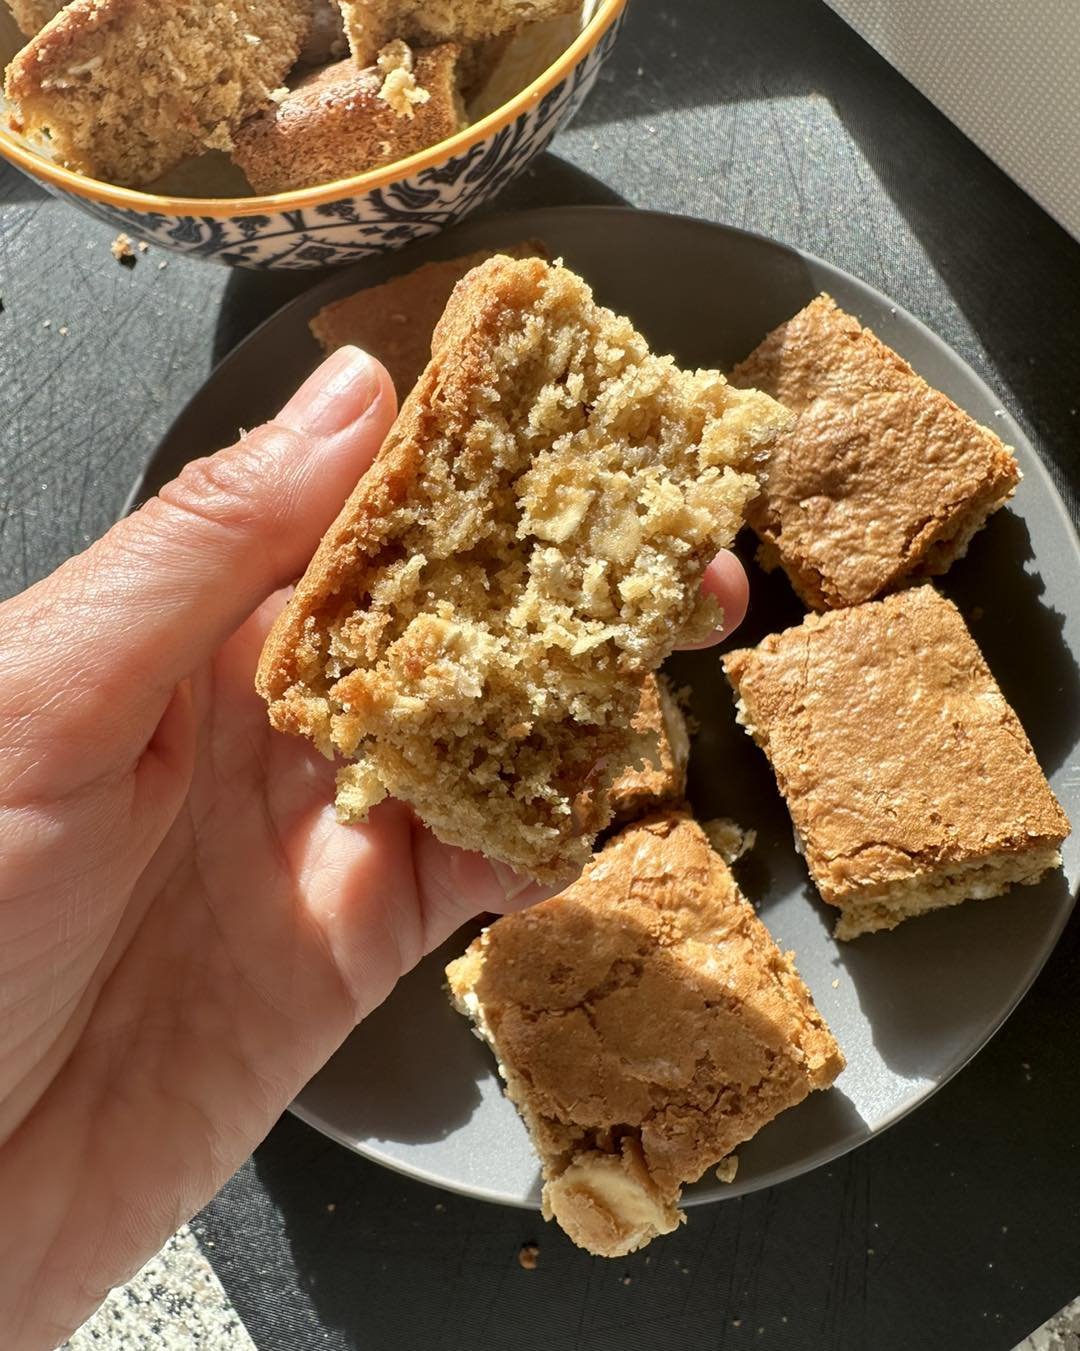 Want to make something easy for Anzac Day?

Grab your bag of blondie mix 
2 Eggs
115g Melted Butter
1/2 Cup of Oats

Pre heat your oven to 180c and line your baking tray
Mix all the ingredients together and scrape inton the lined tin
Bake for 27-30 m